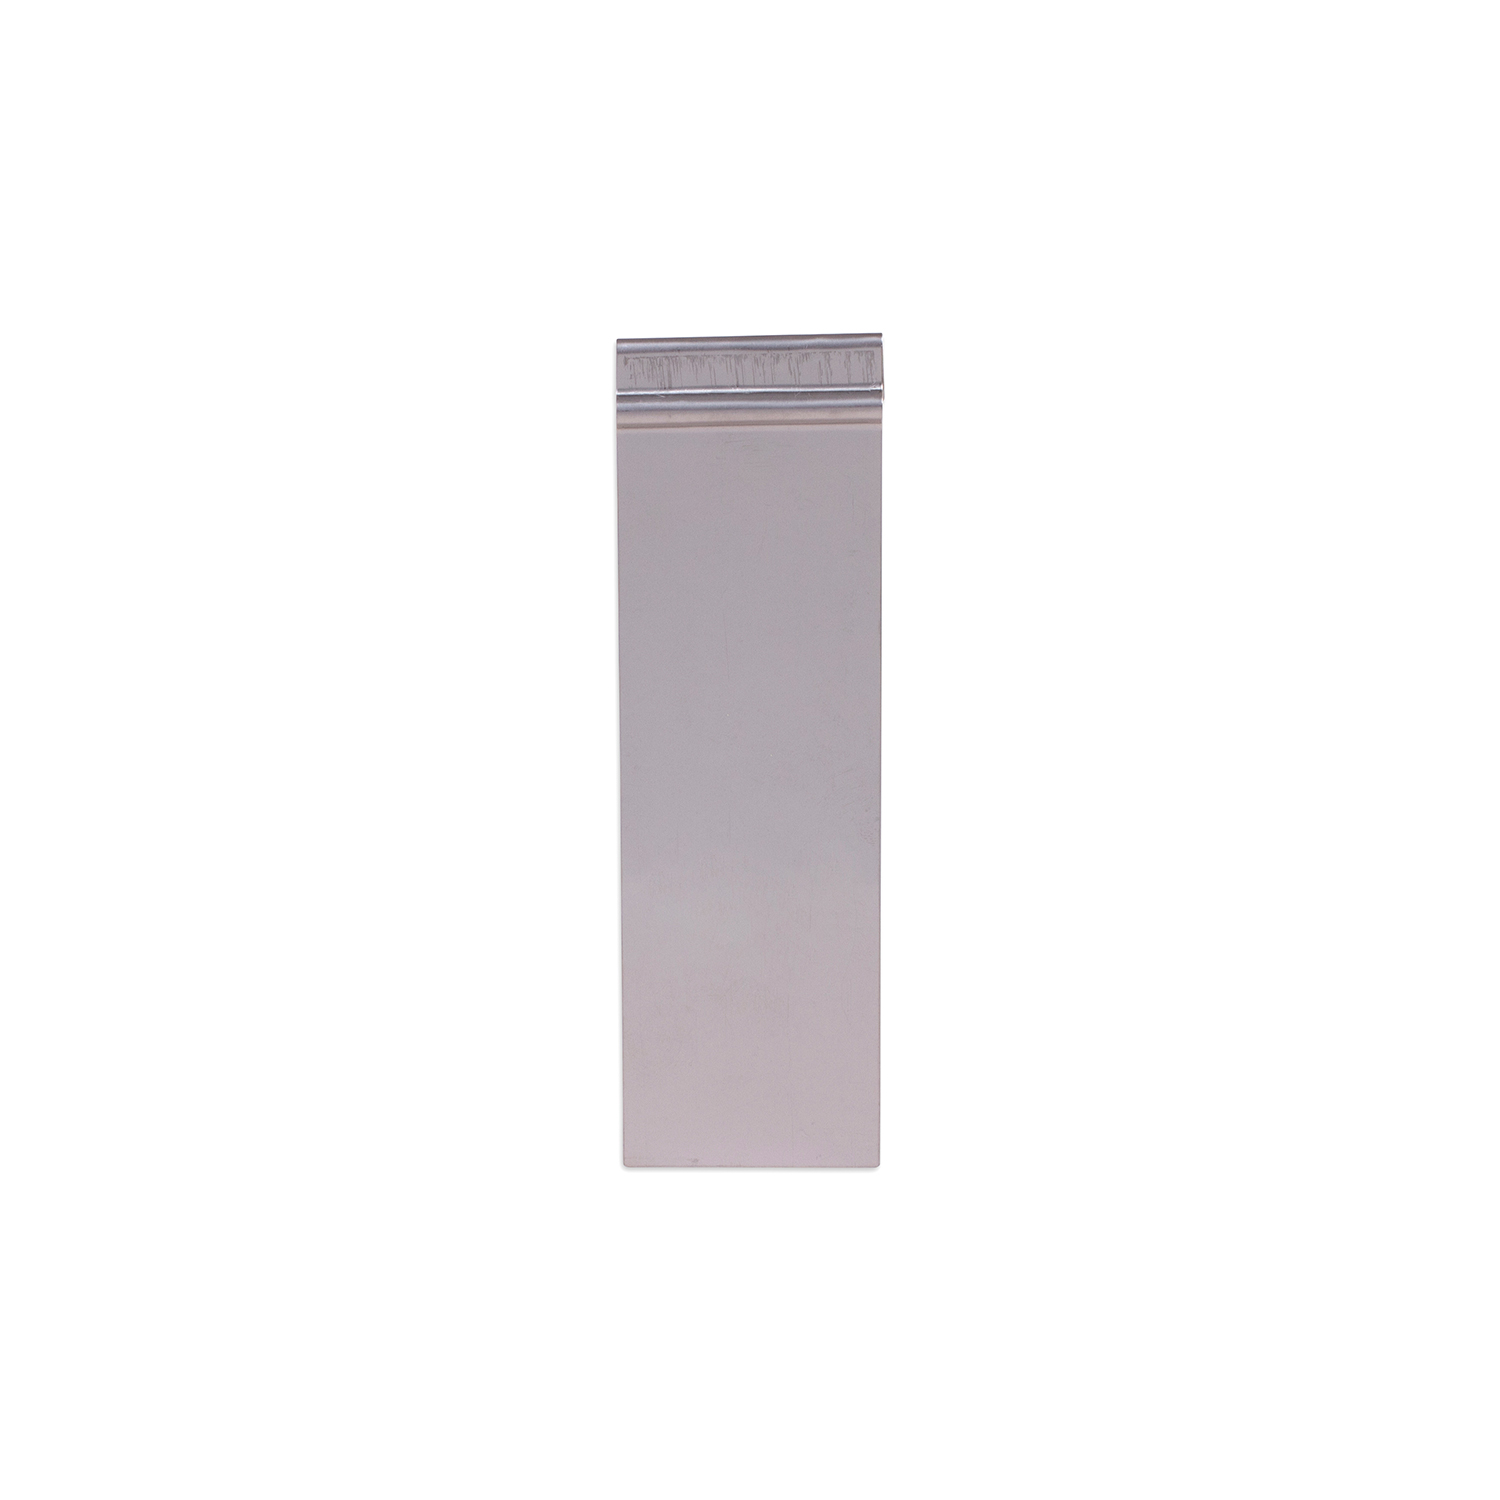 Stainless steel anode, 150x50x0.5 mm